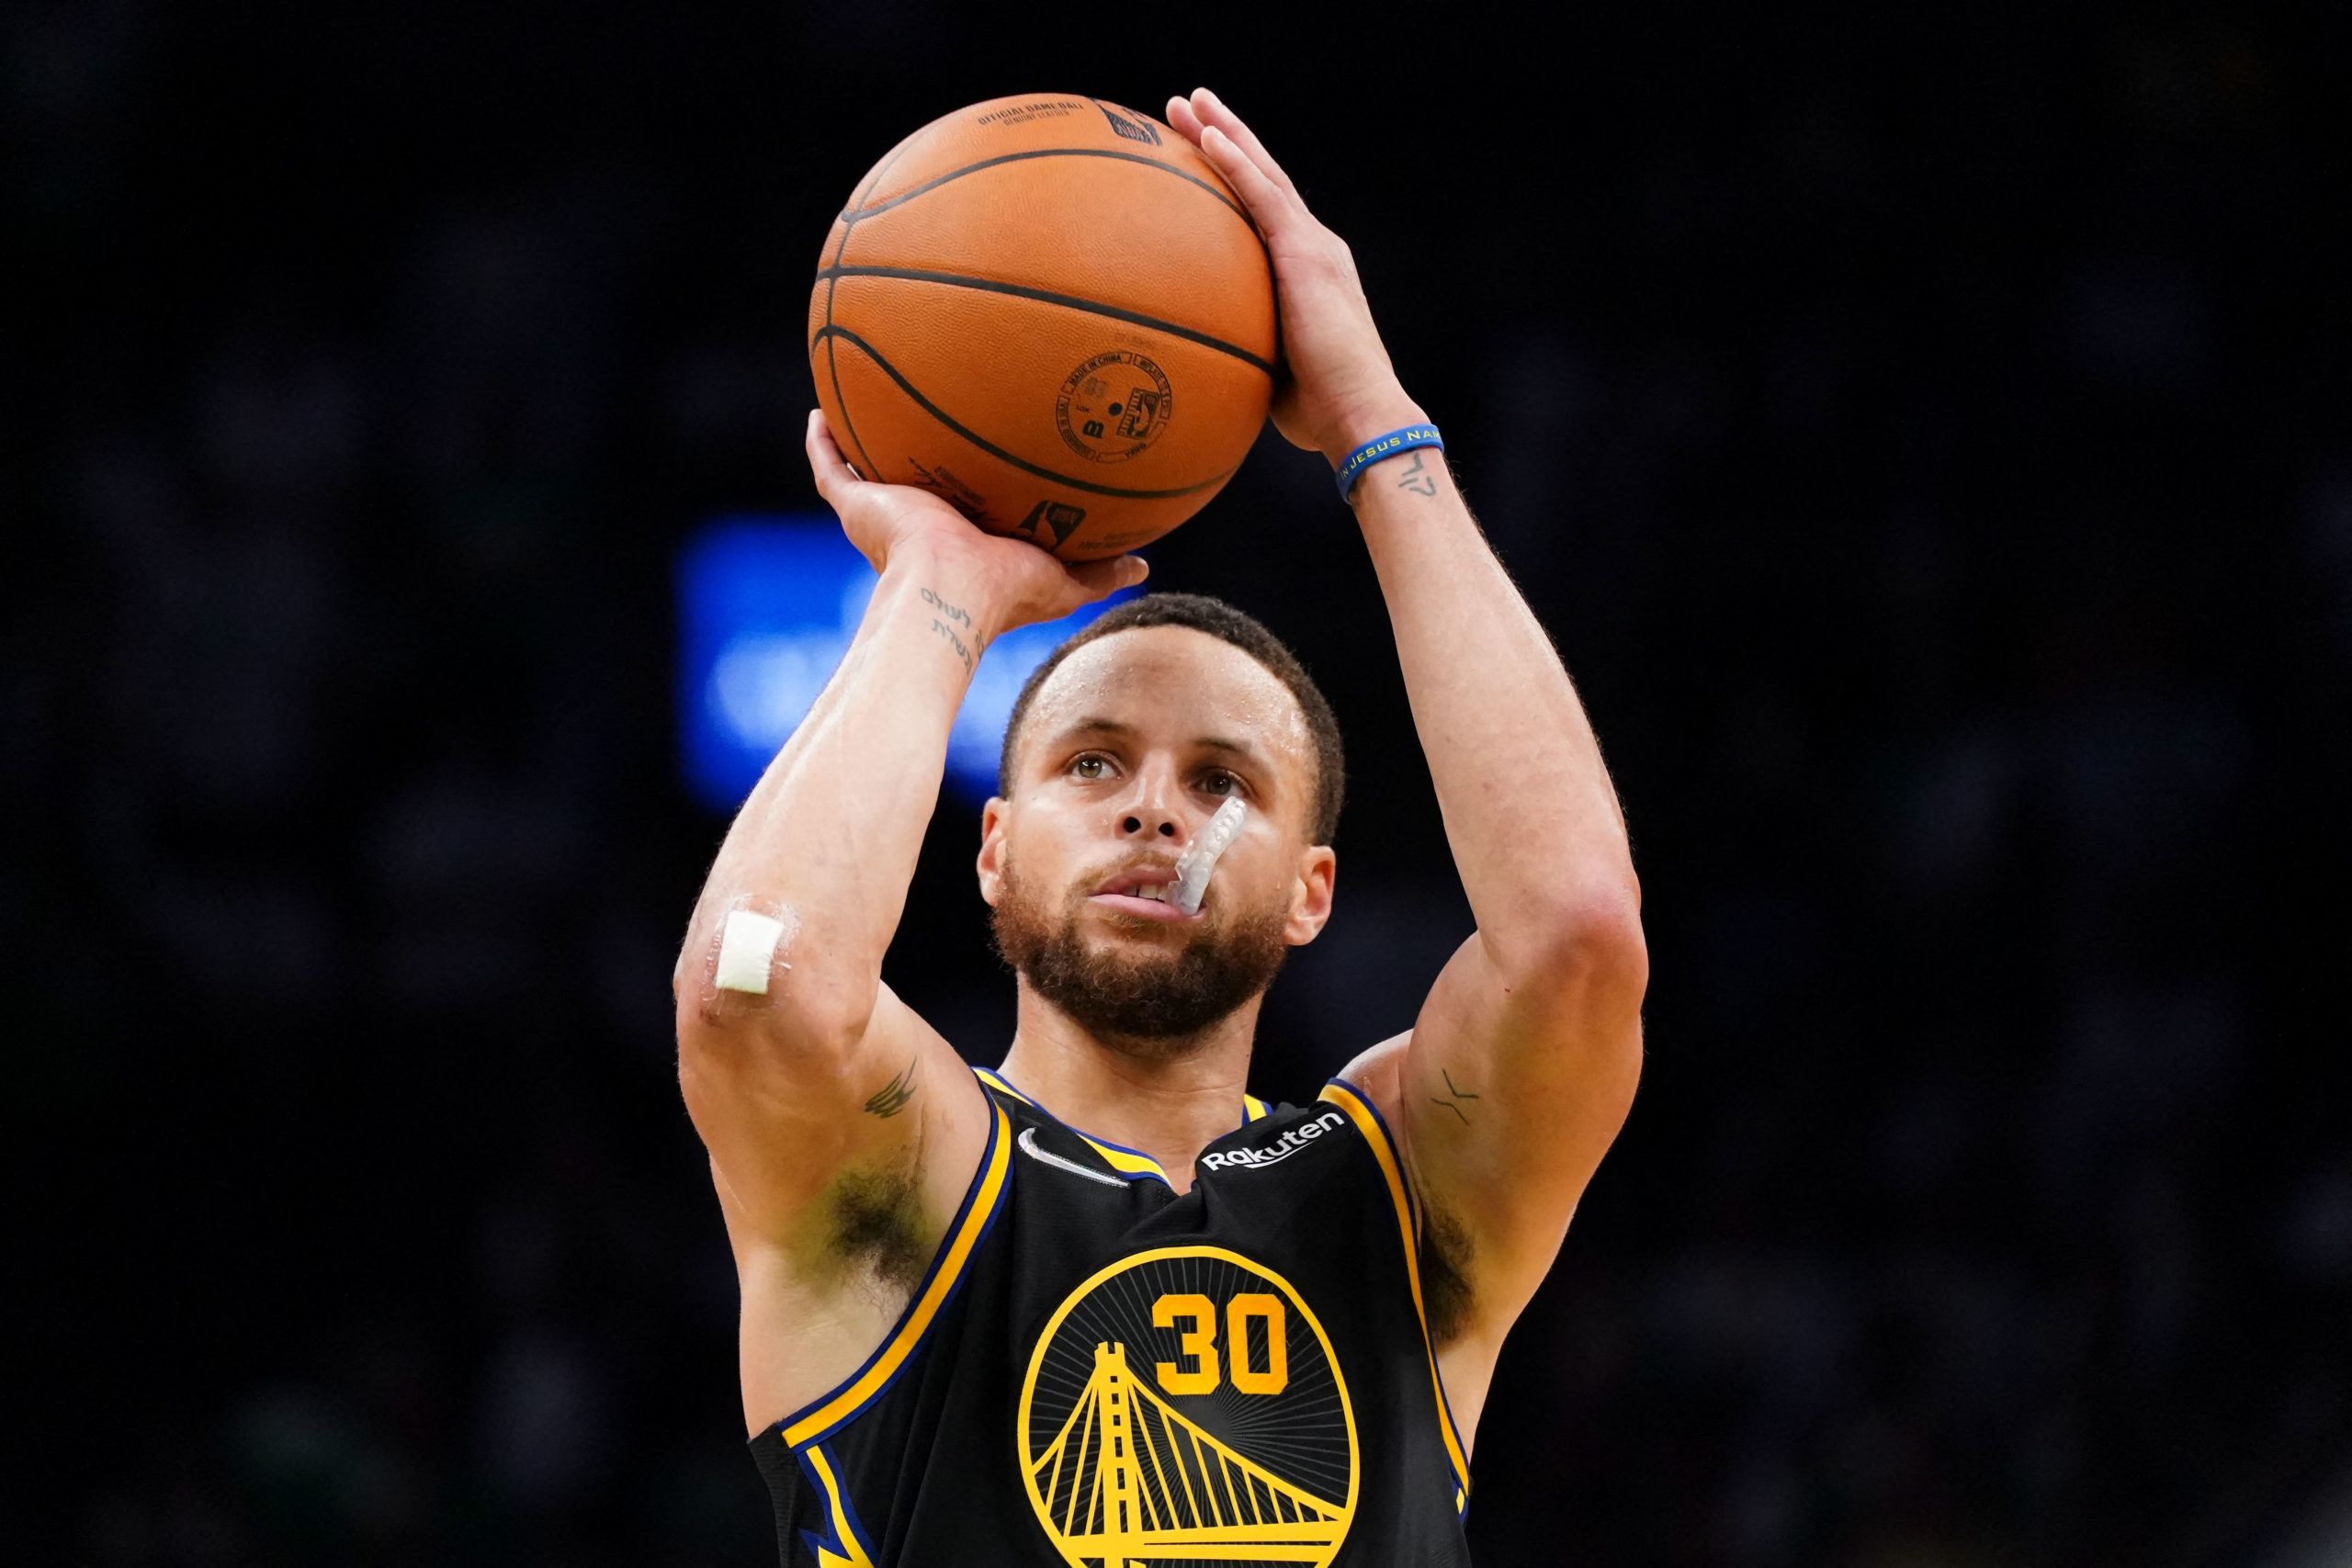 Jun 10, 2022; Boston, Massachusetts, USA; Golden State Warriors guard Stephen Curry (30) takes a free-throw against the Boston Celtics during the fourth quarter of game four in the 2022 NBA Finals at the TD Garden. Mandatory Credit: David Butler II-USA TODAY Sports